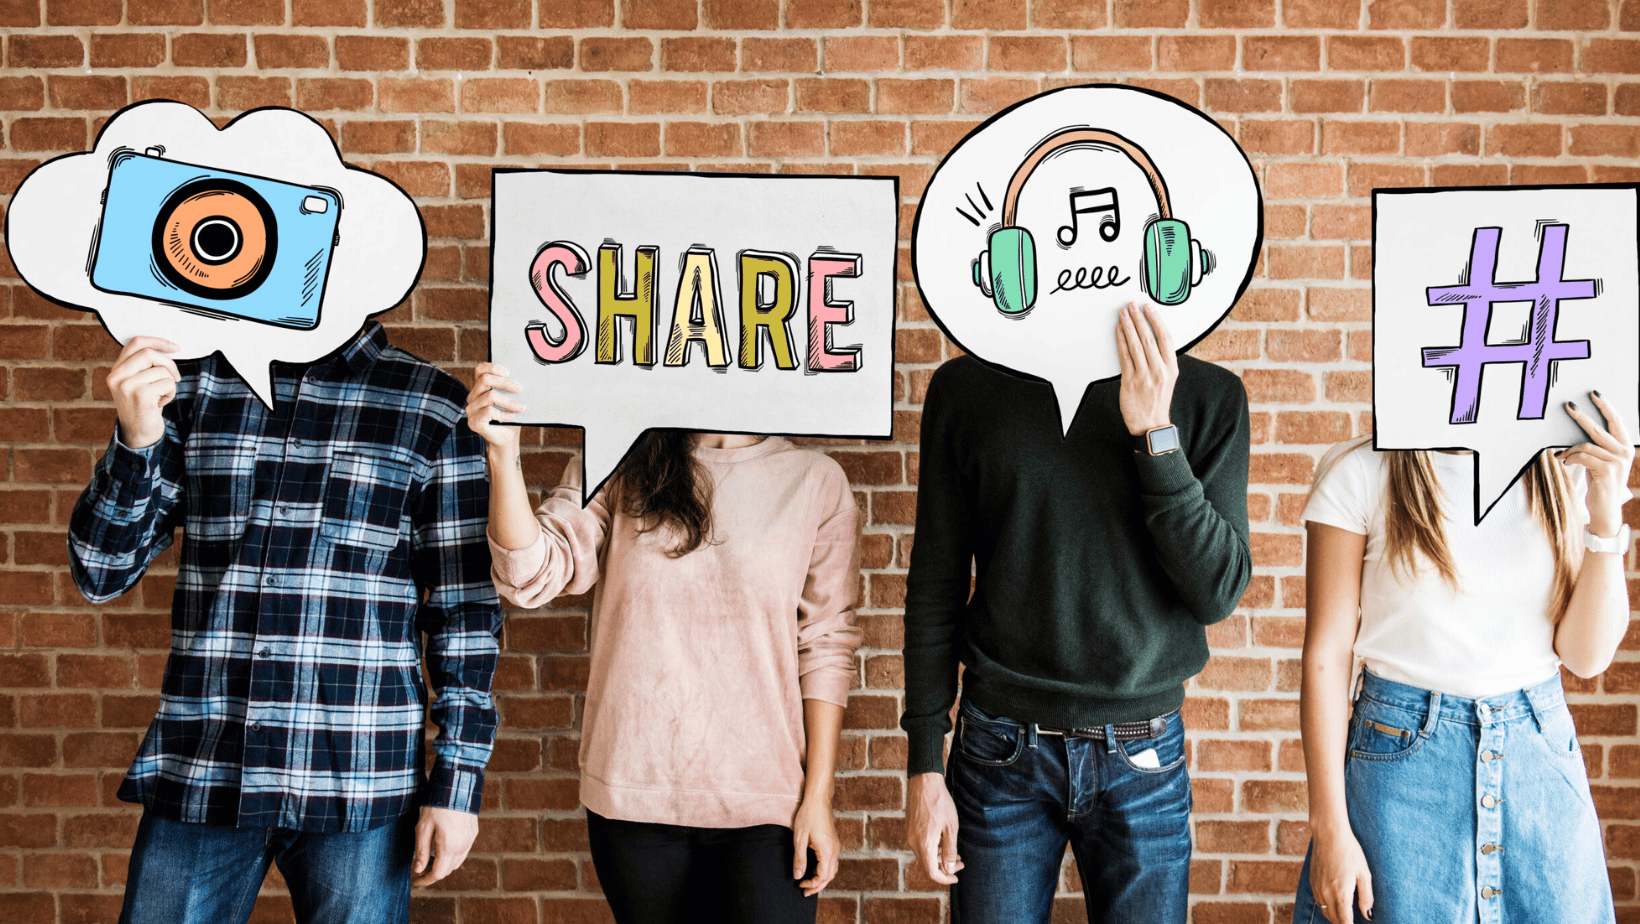 A team is holding up symbols of social media success: likes, shares, comments, and followers represent Engage in Ascend Adwerks' 3E Advancement Model.